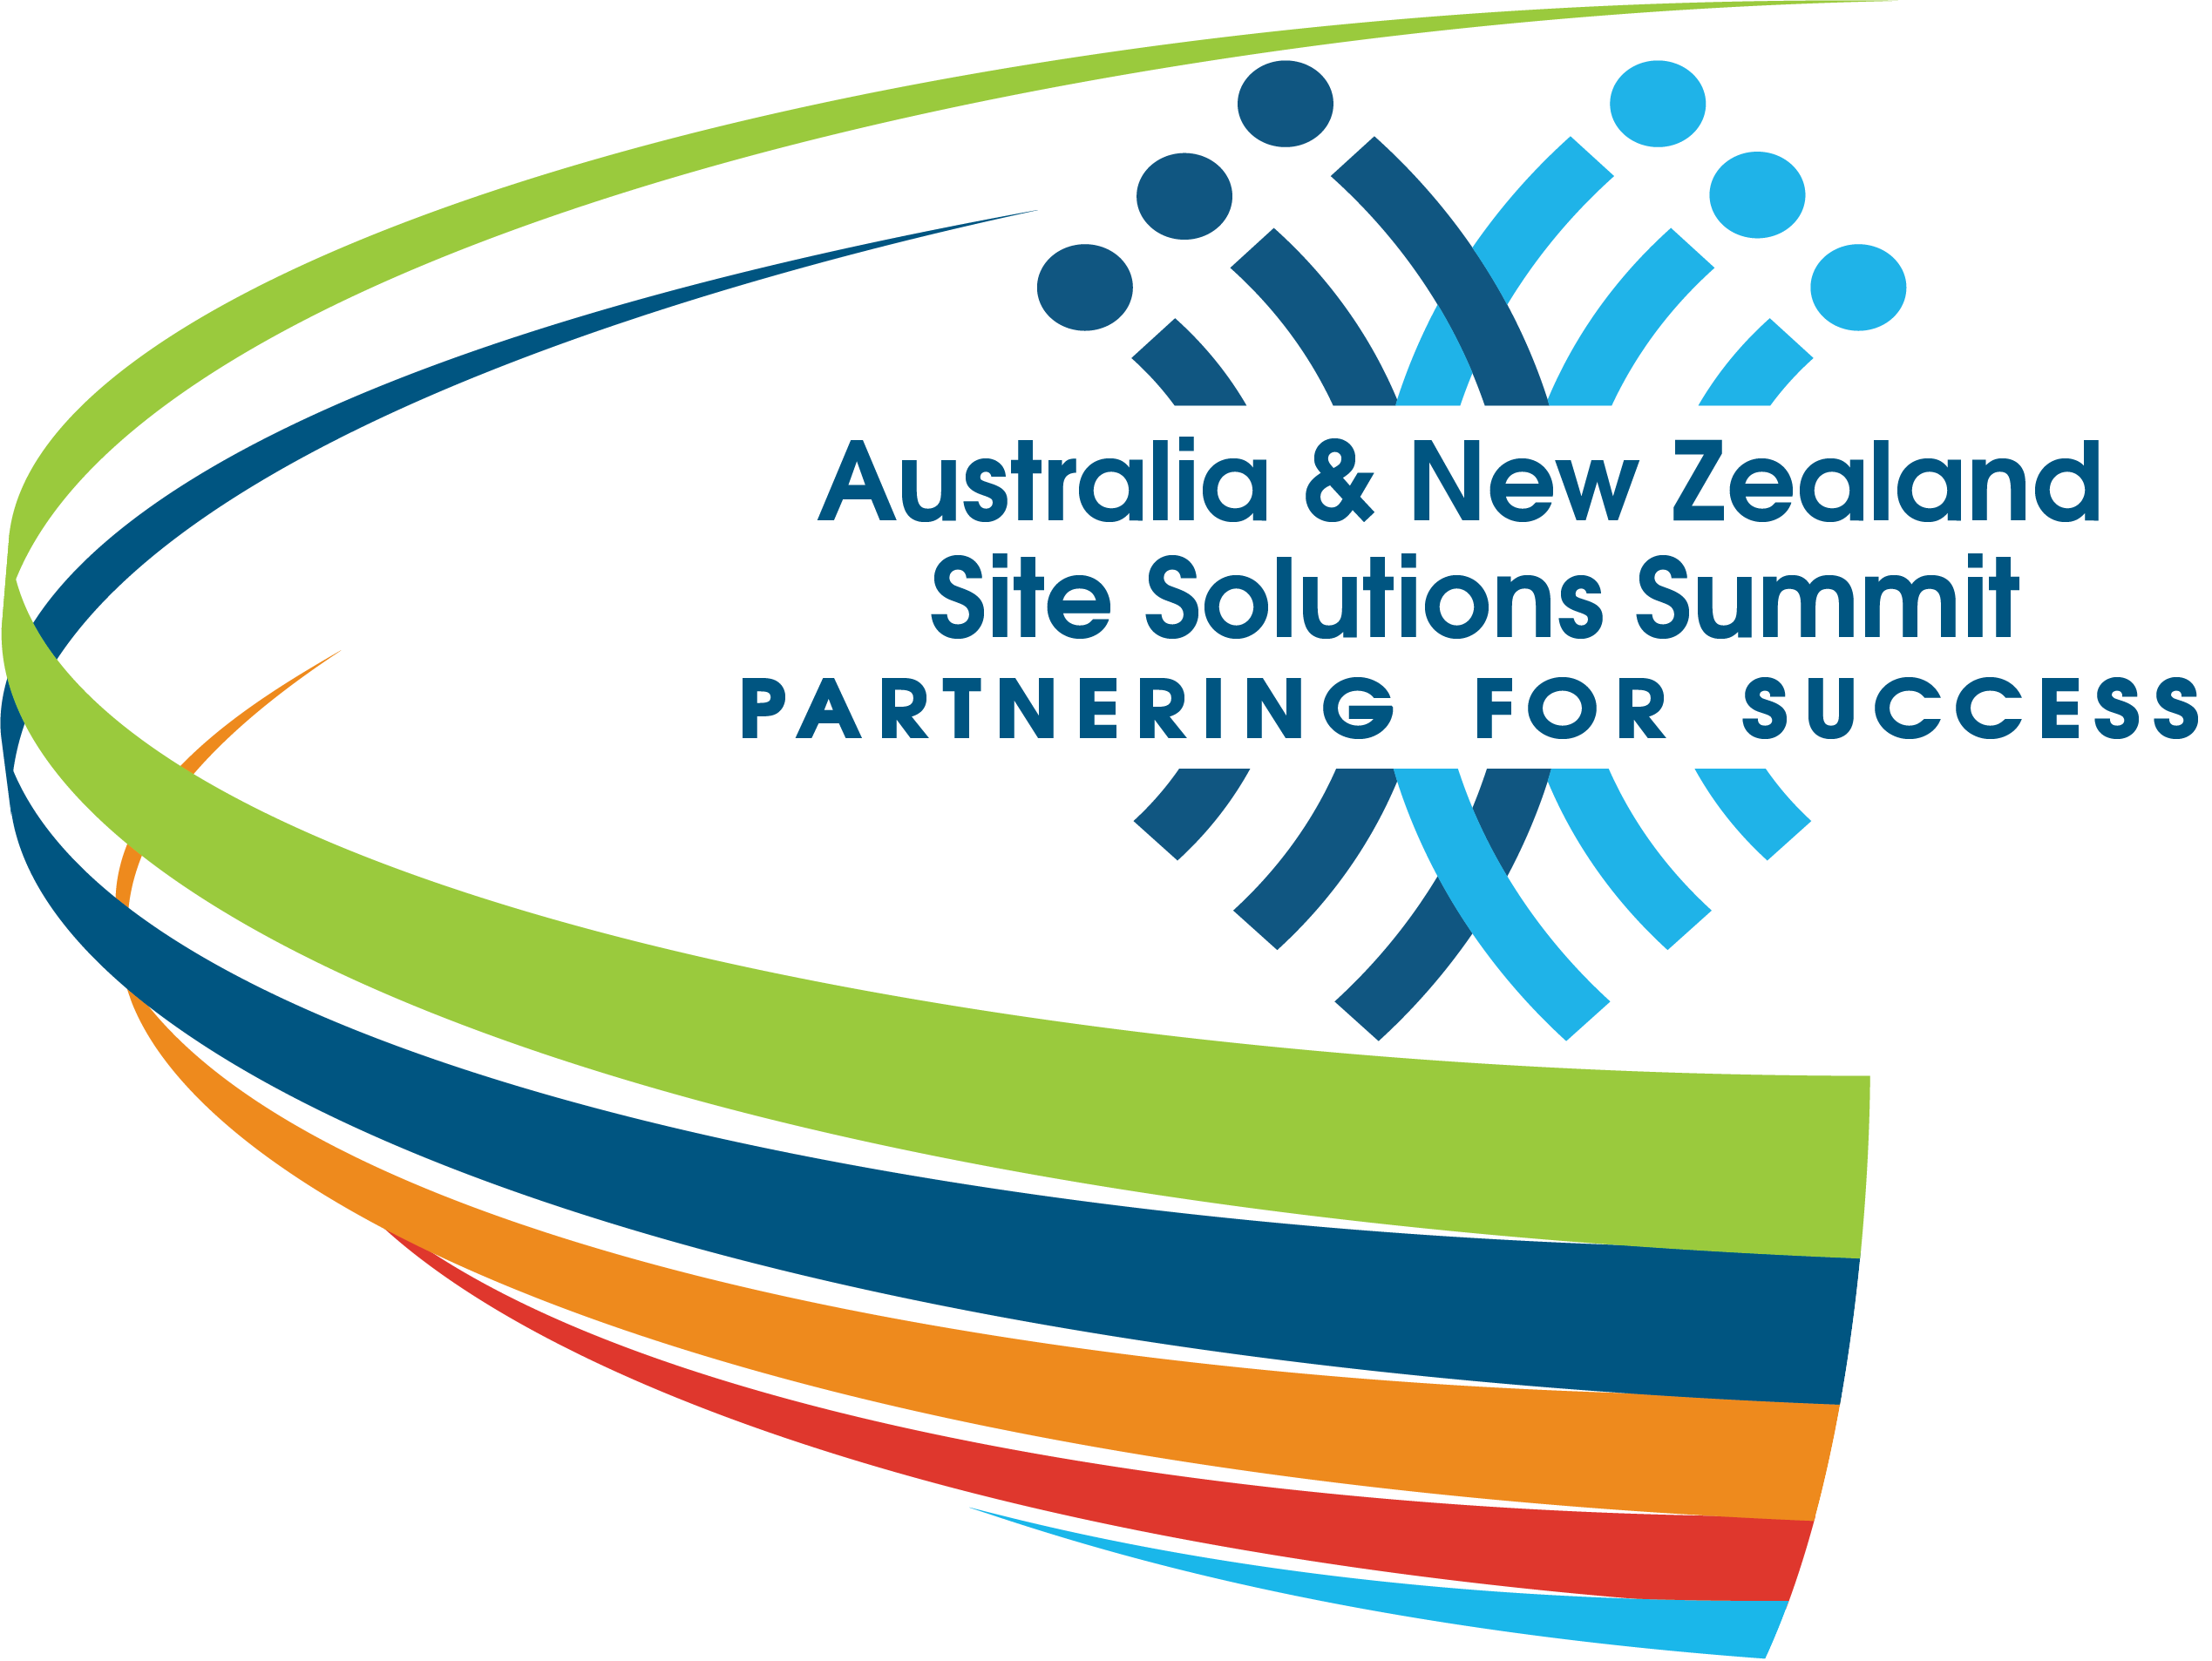 Australia and New Zealand Site Solutions Summit